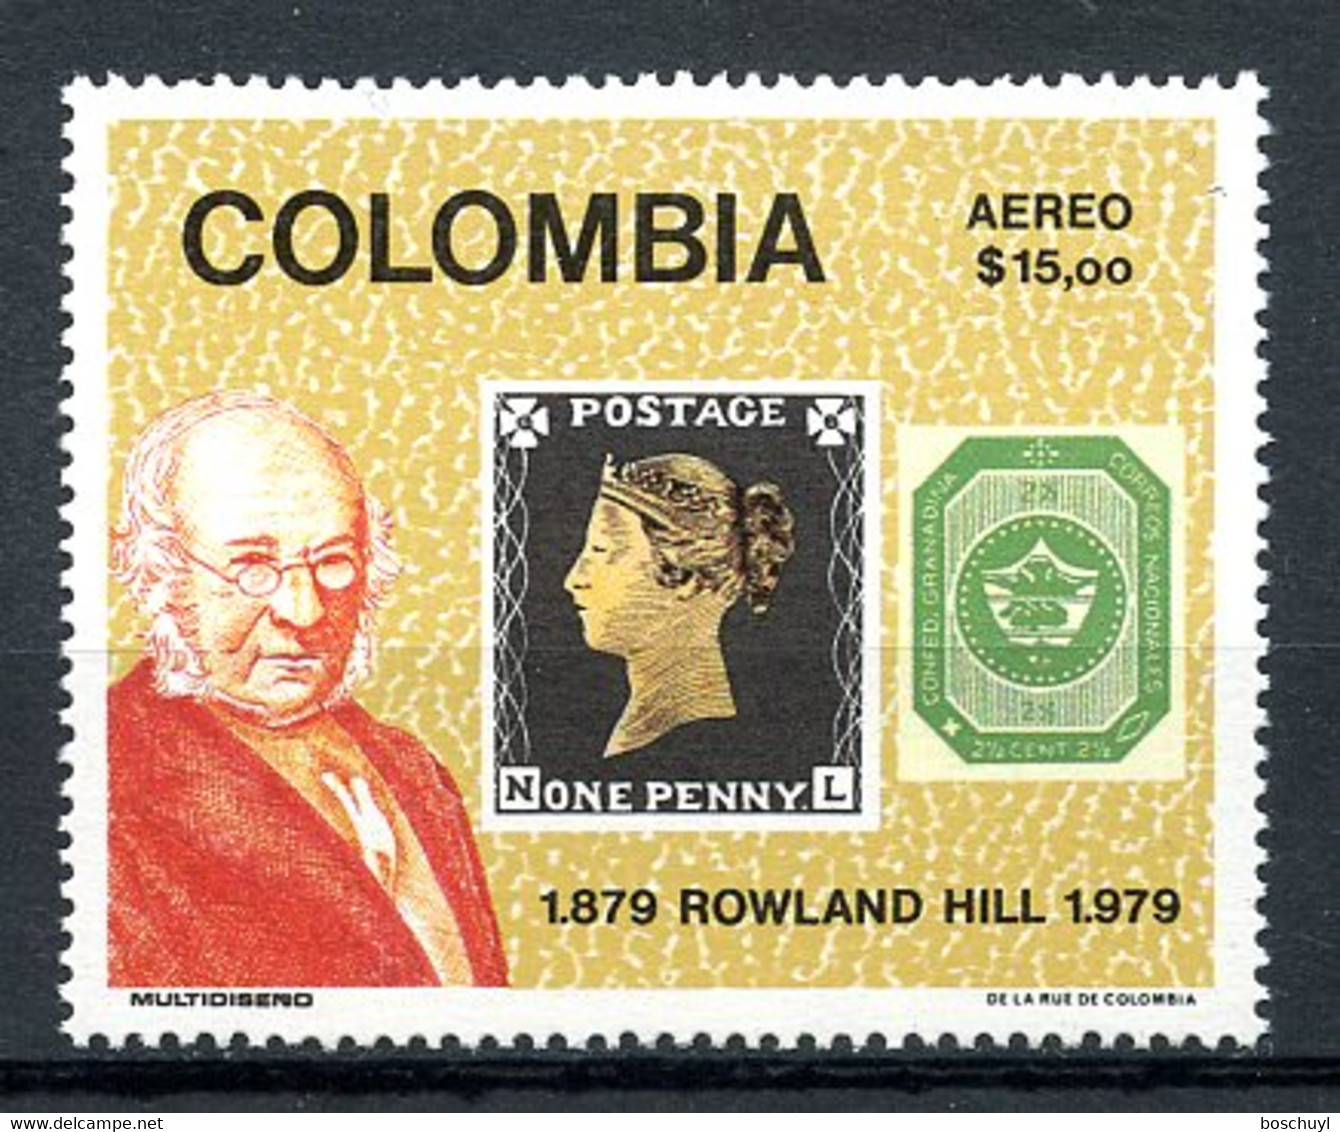 Colombia, 1979, Sir Rowland Hill, UPU, United Nations, MNH, Michel 1403 - Colombia